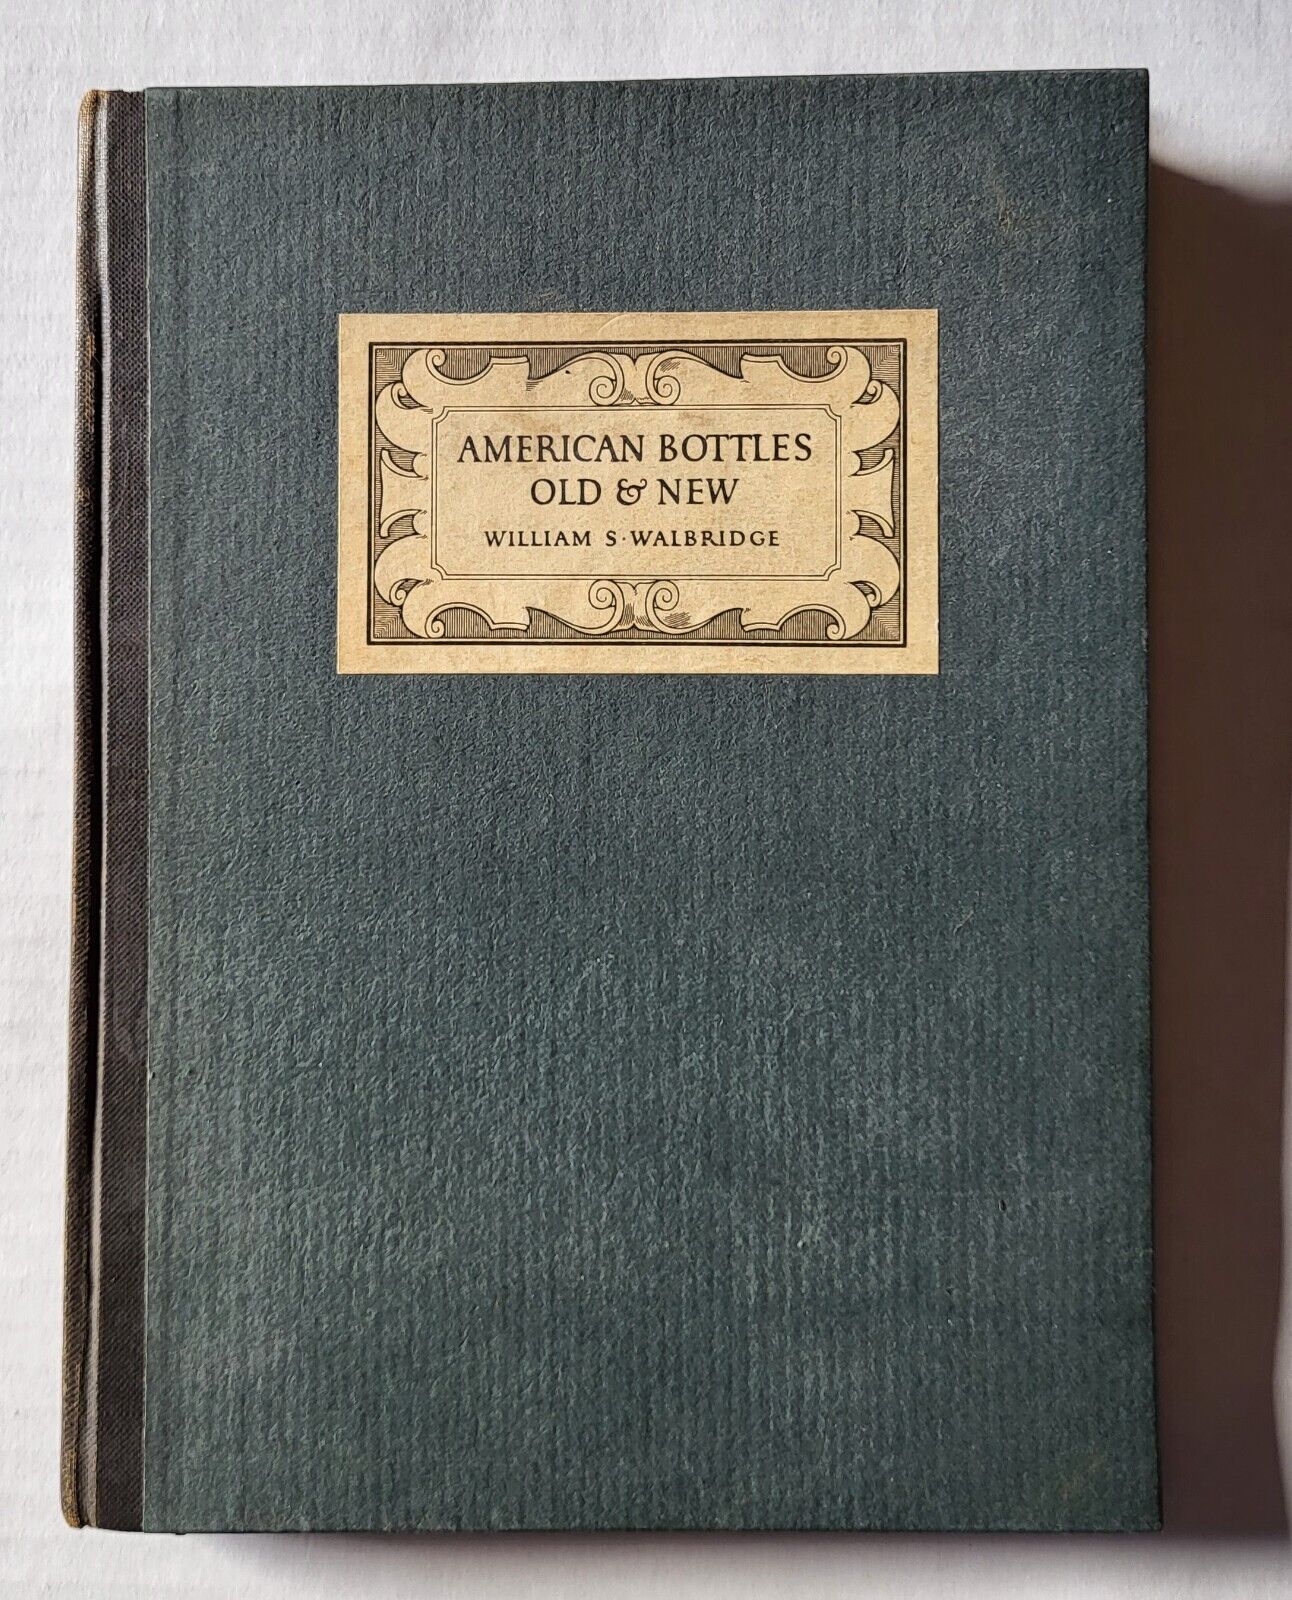 1920 American Bottles Old & New Collector Guide Book